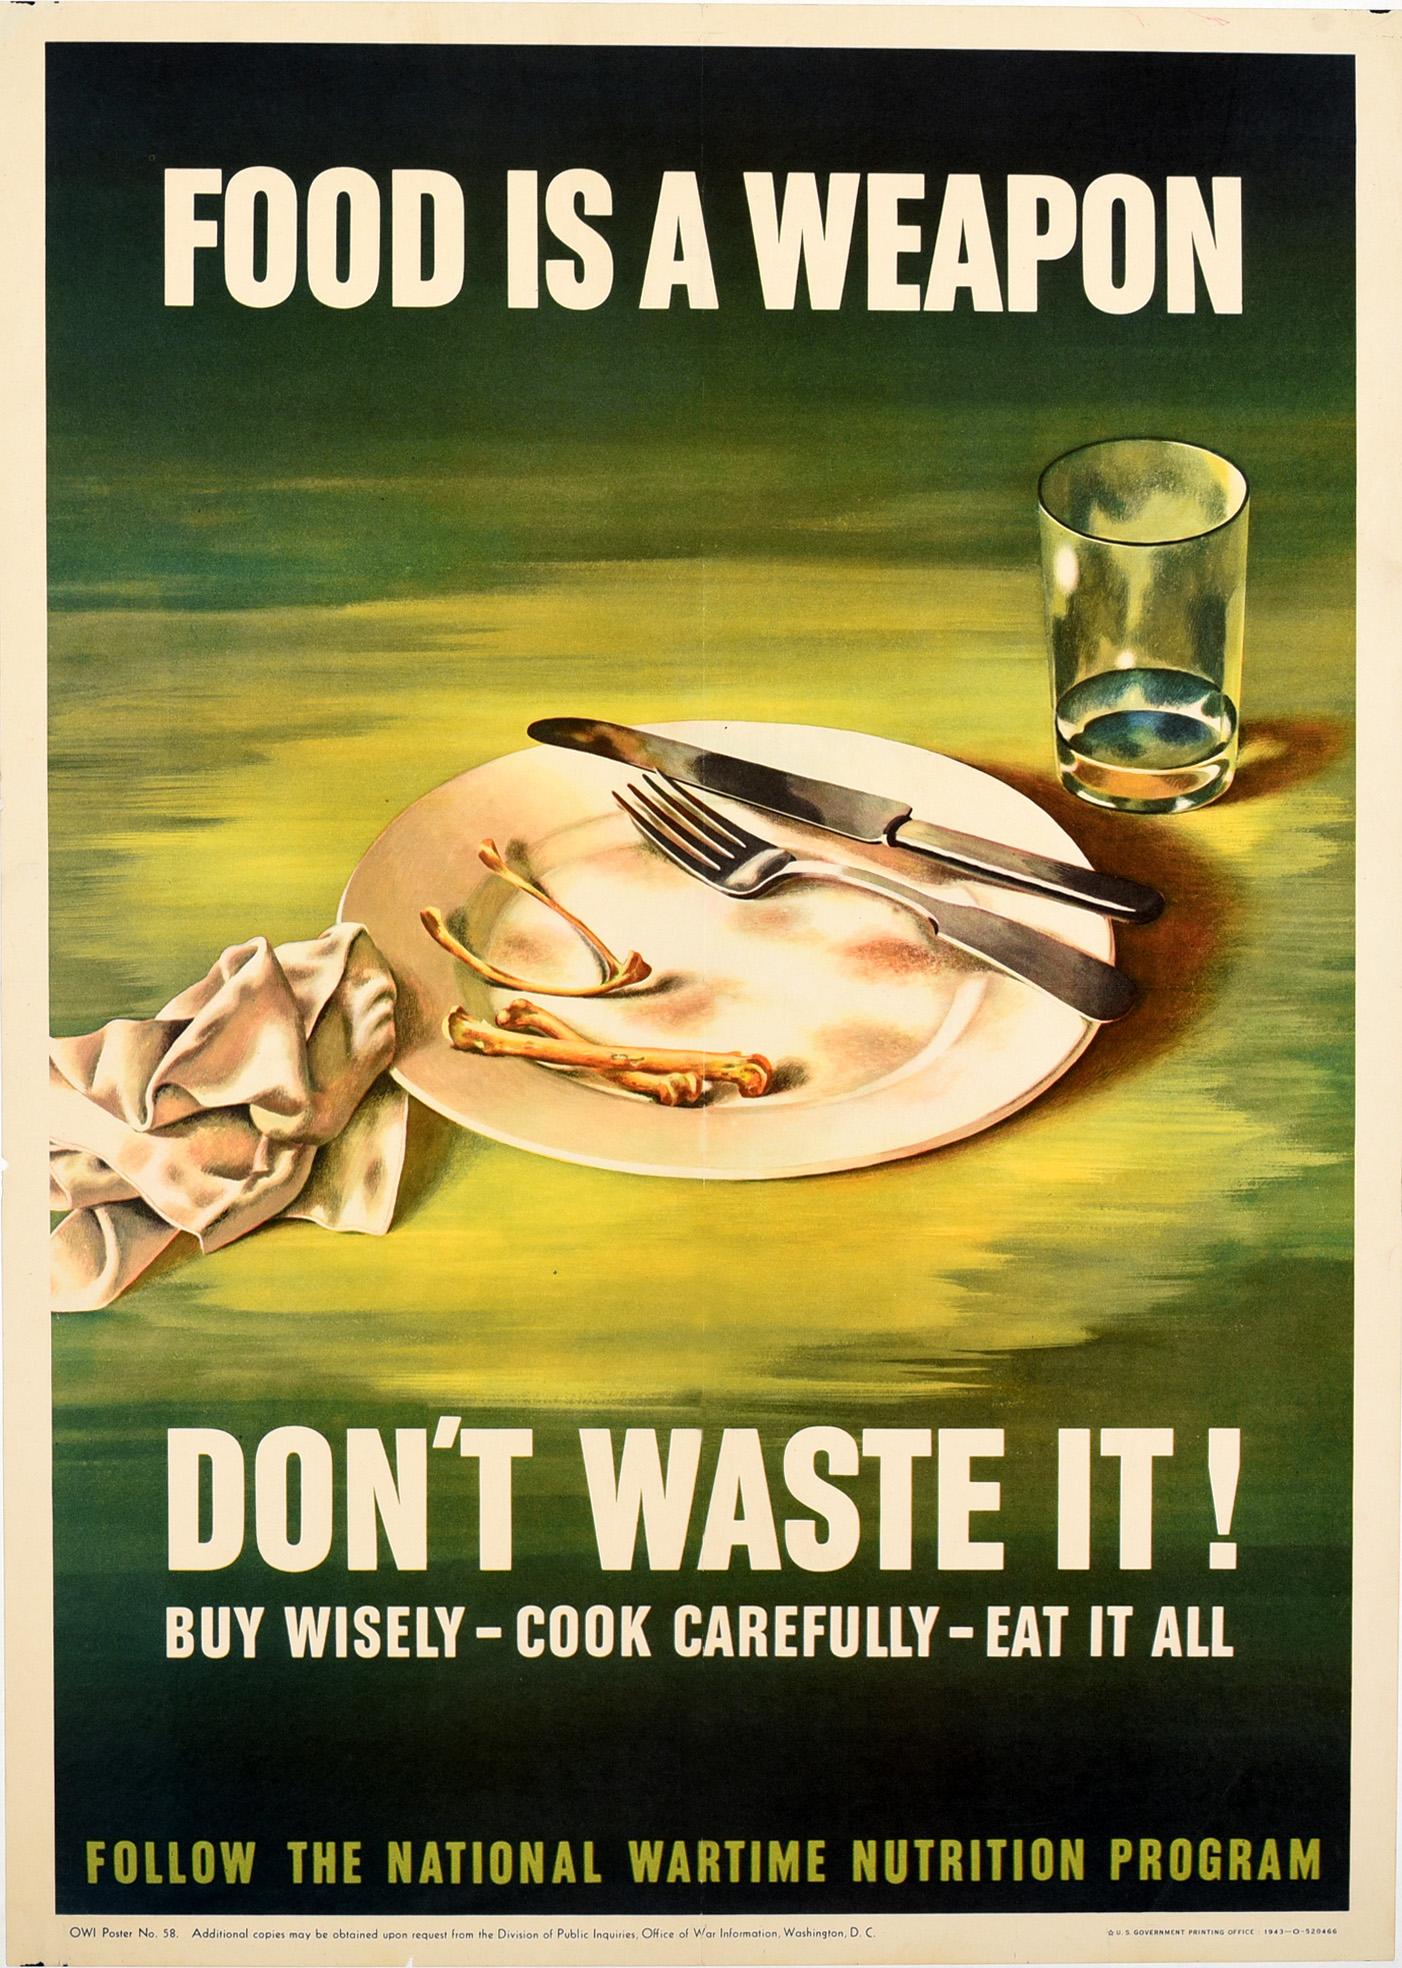 Unknown Print - Original Vintage Poster Food Is A Weapon Don't Waste It WWII Wartime Nutrition